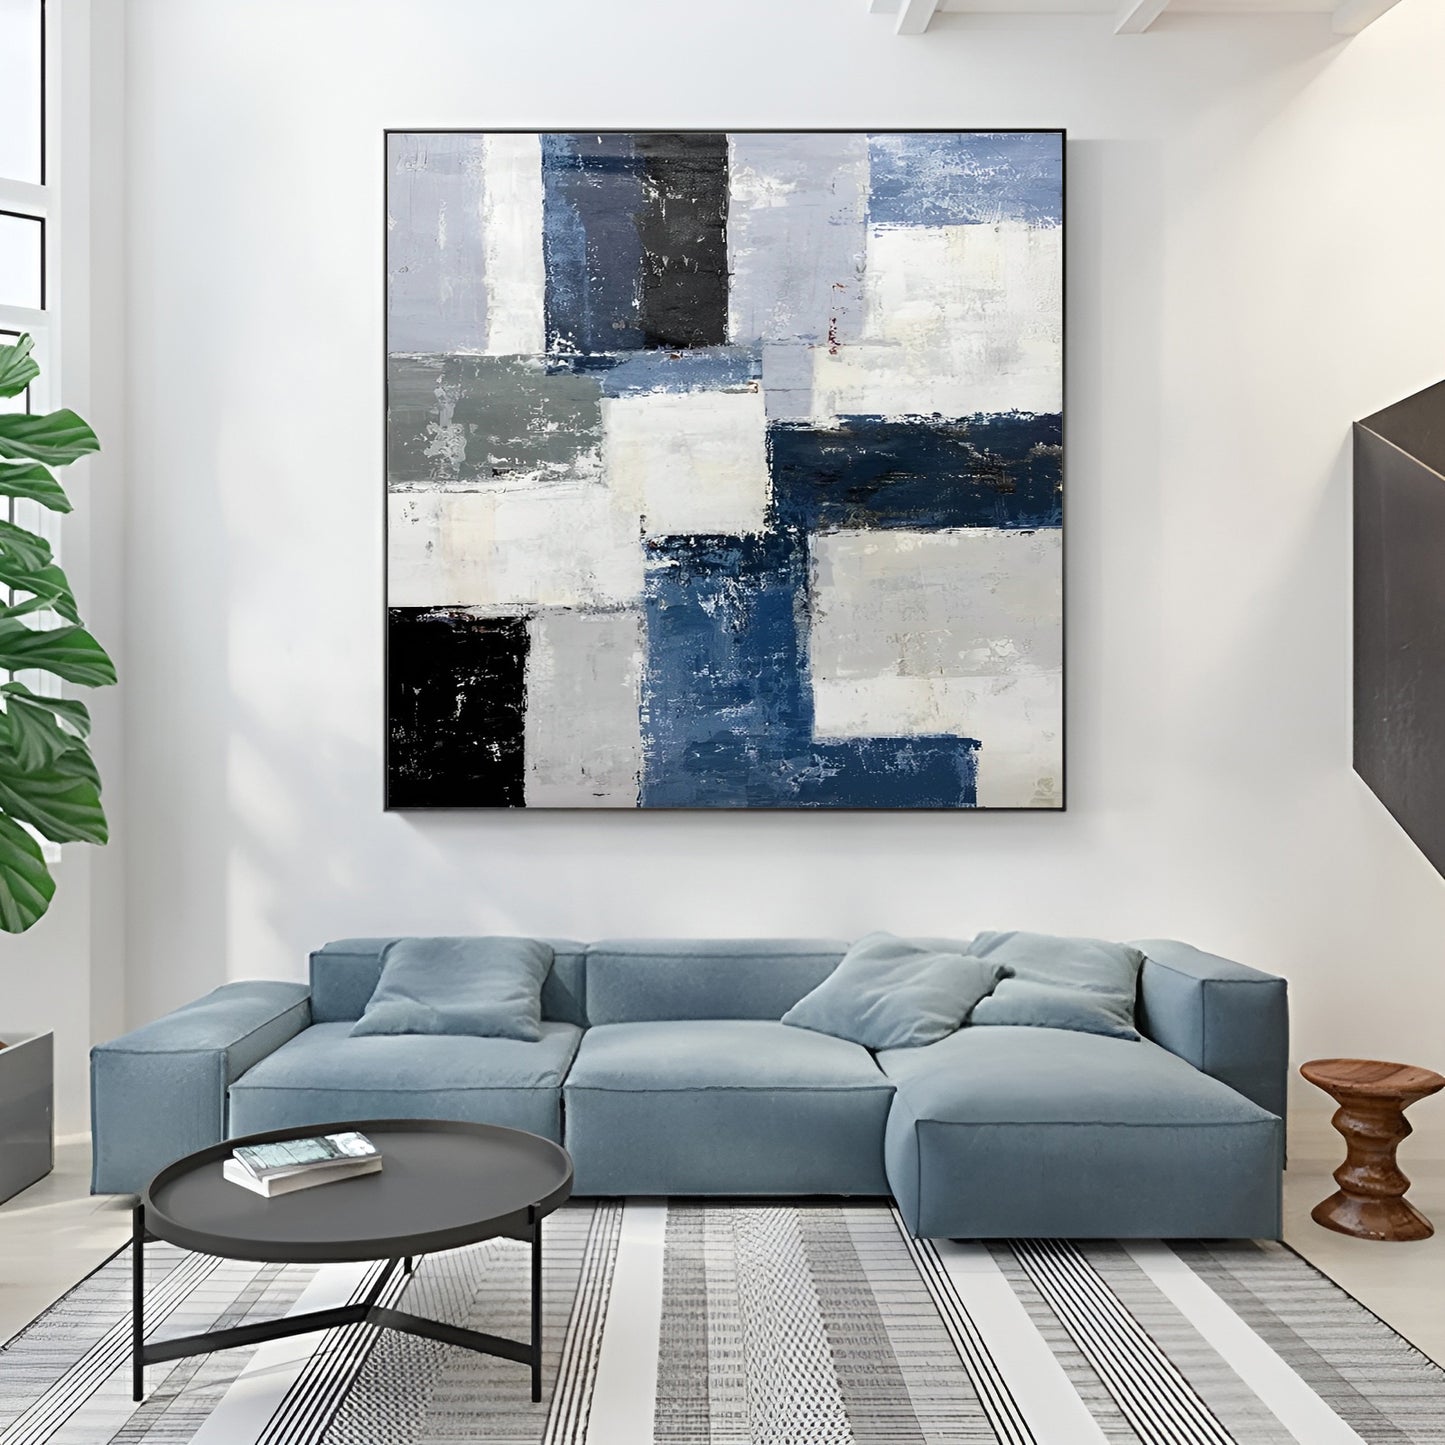 Chemain - Large Grey and Blue Abstract Painting on Canvas